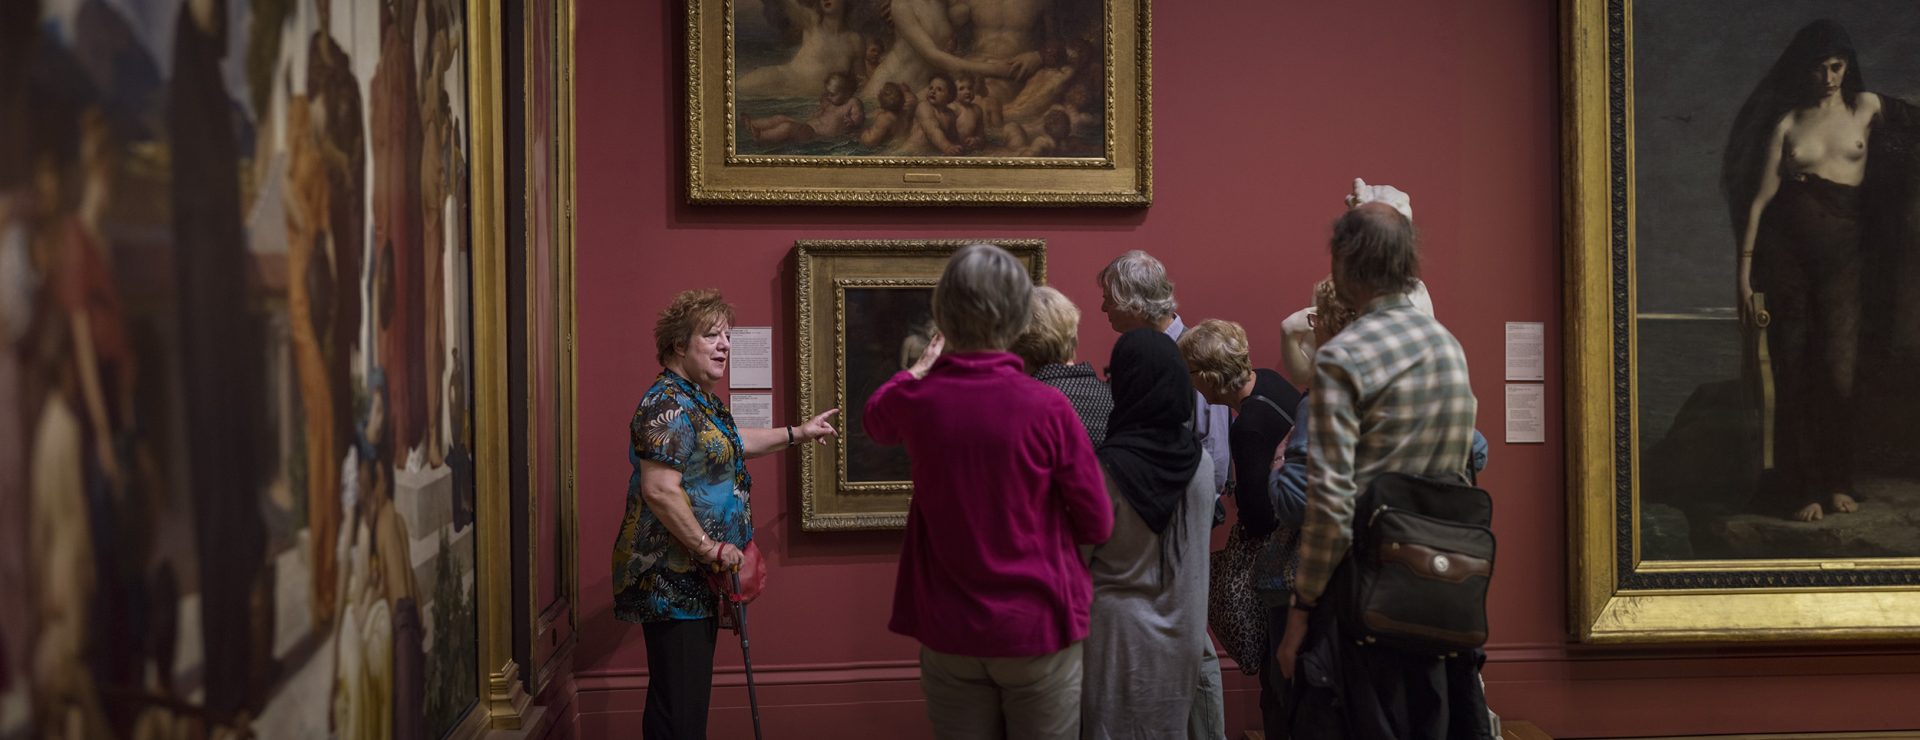 A small crowd of art lovers gather around a painting in a gallery.